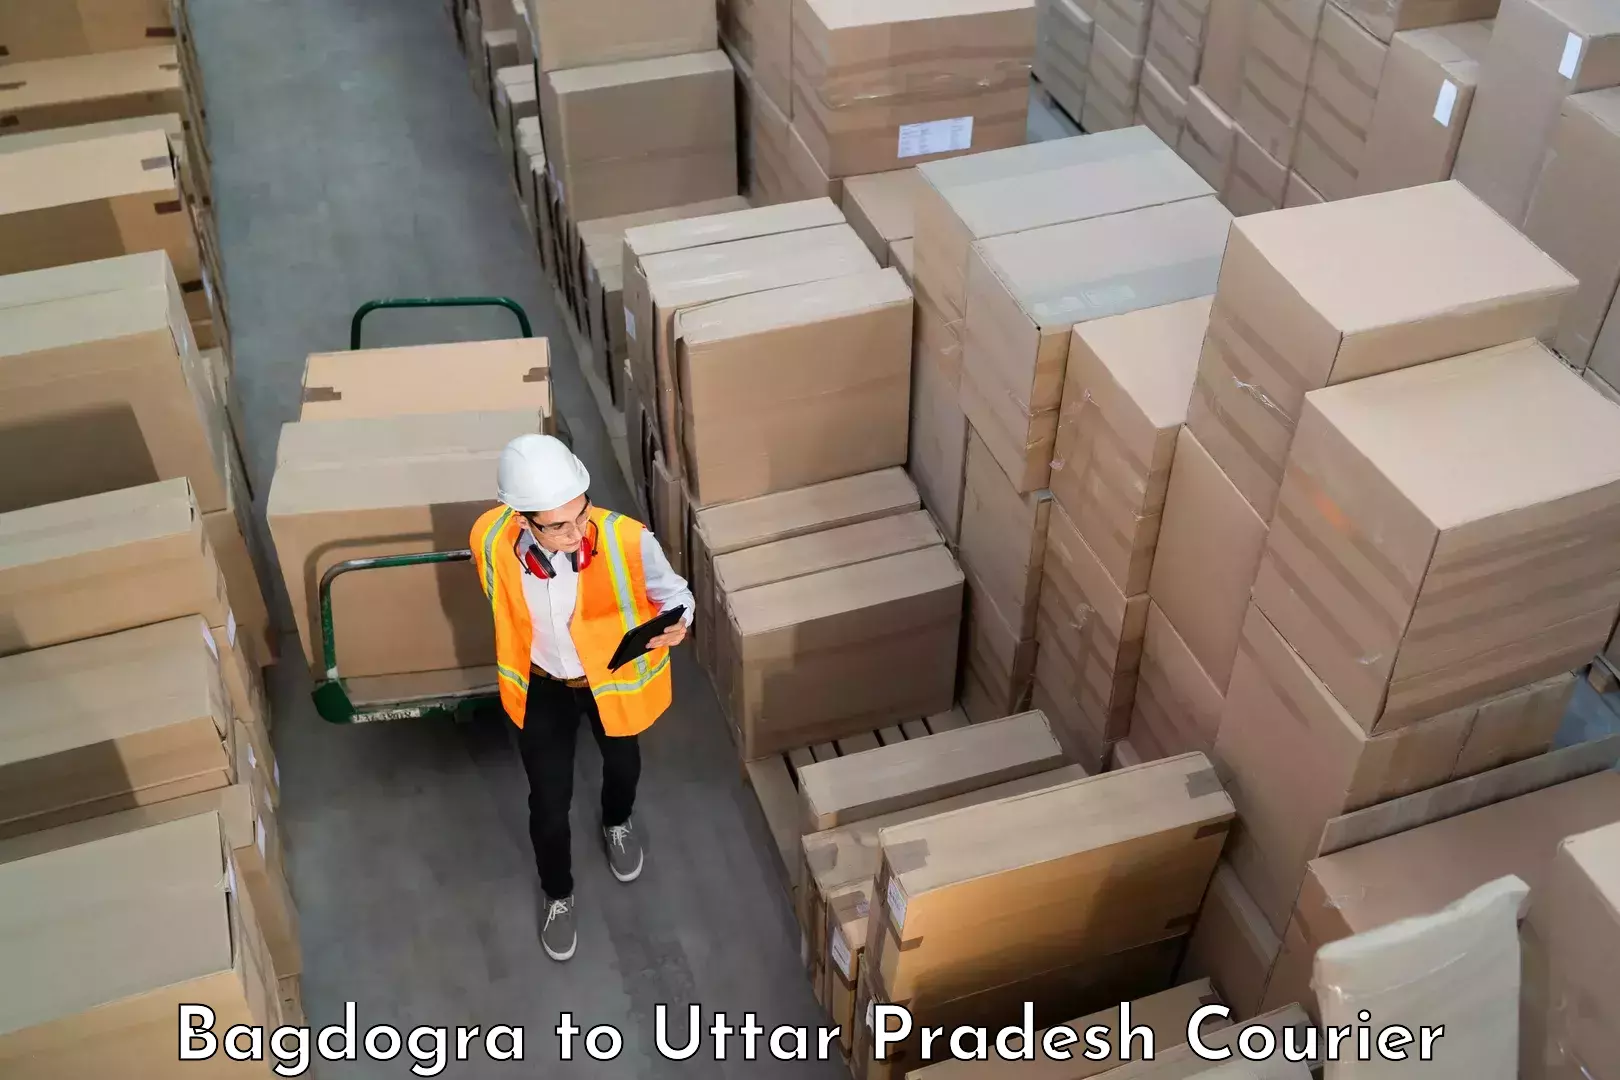 Instant baggage transport quote Bagdogra to Agra